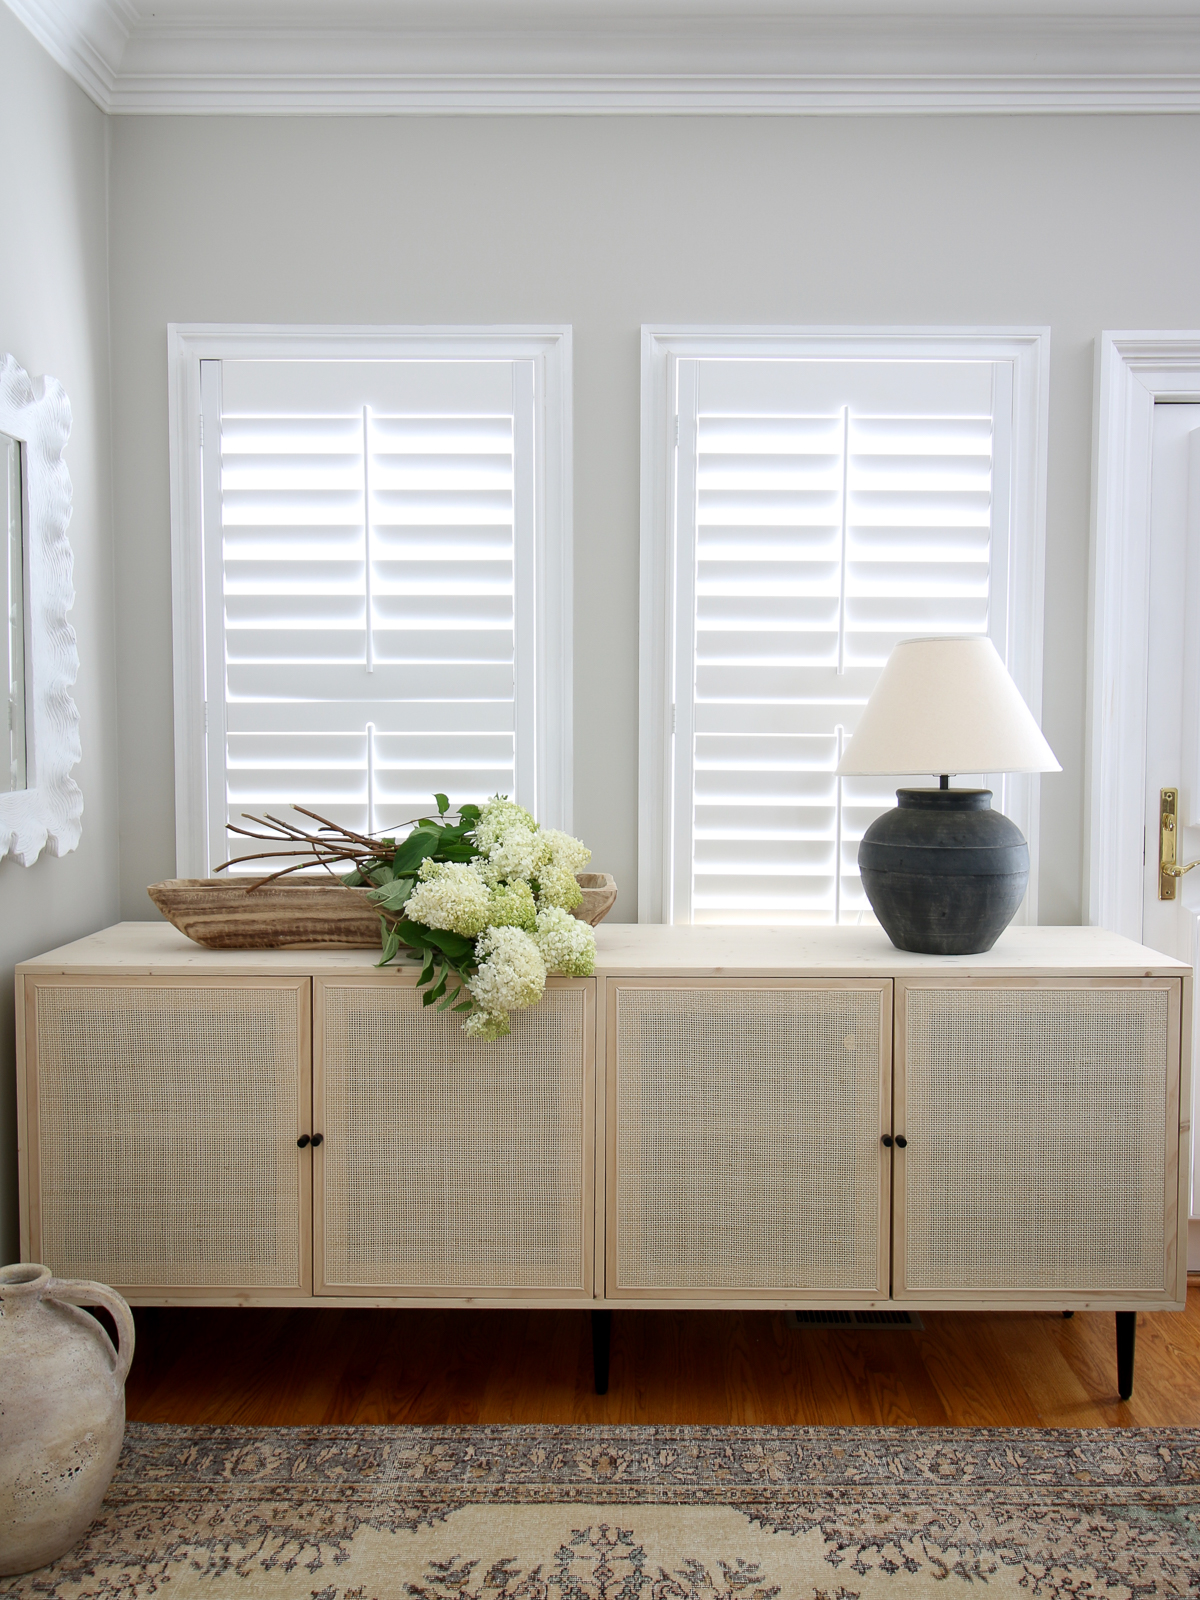 cane cabinet with clear natural stain in front of windows with shutters and a oriental rug. Black ceramic lamp.